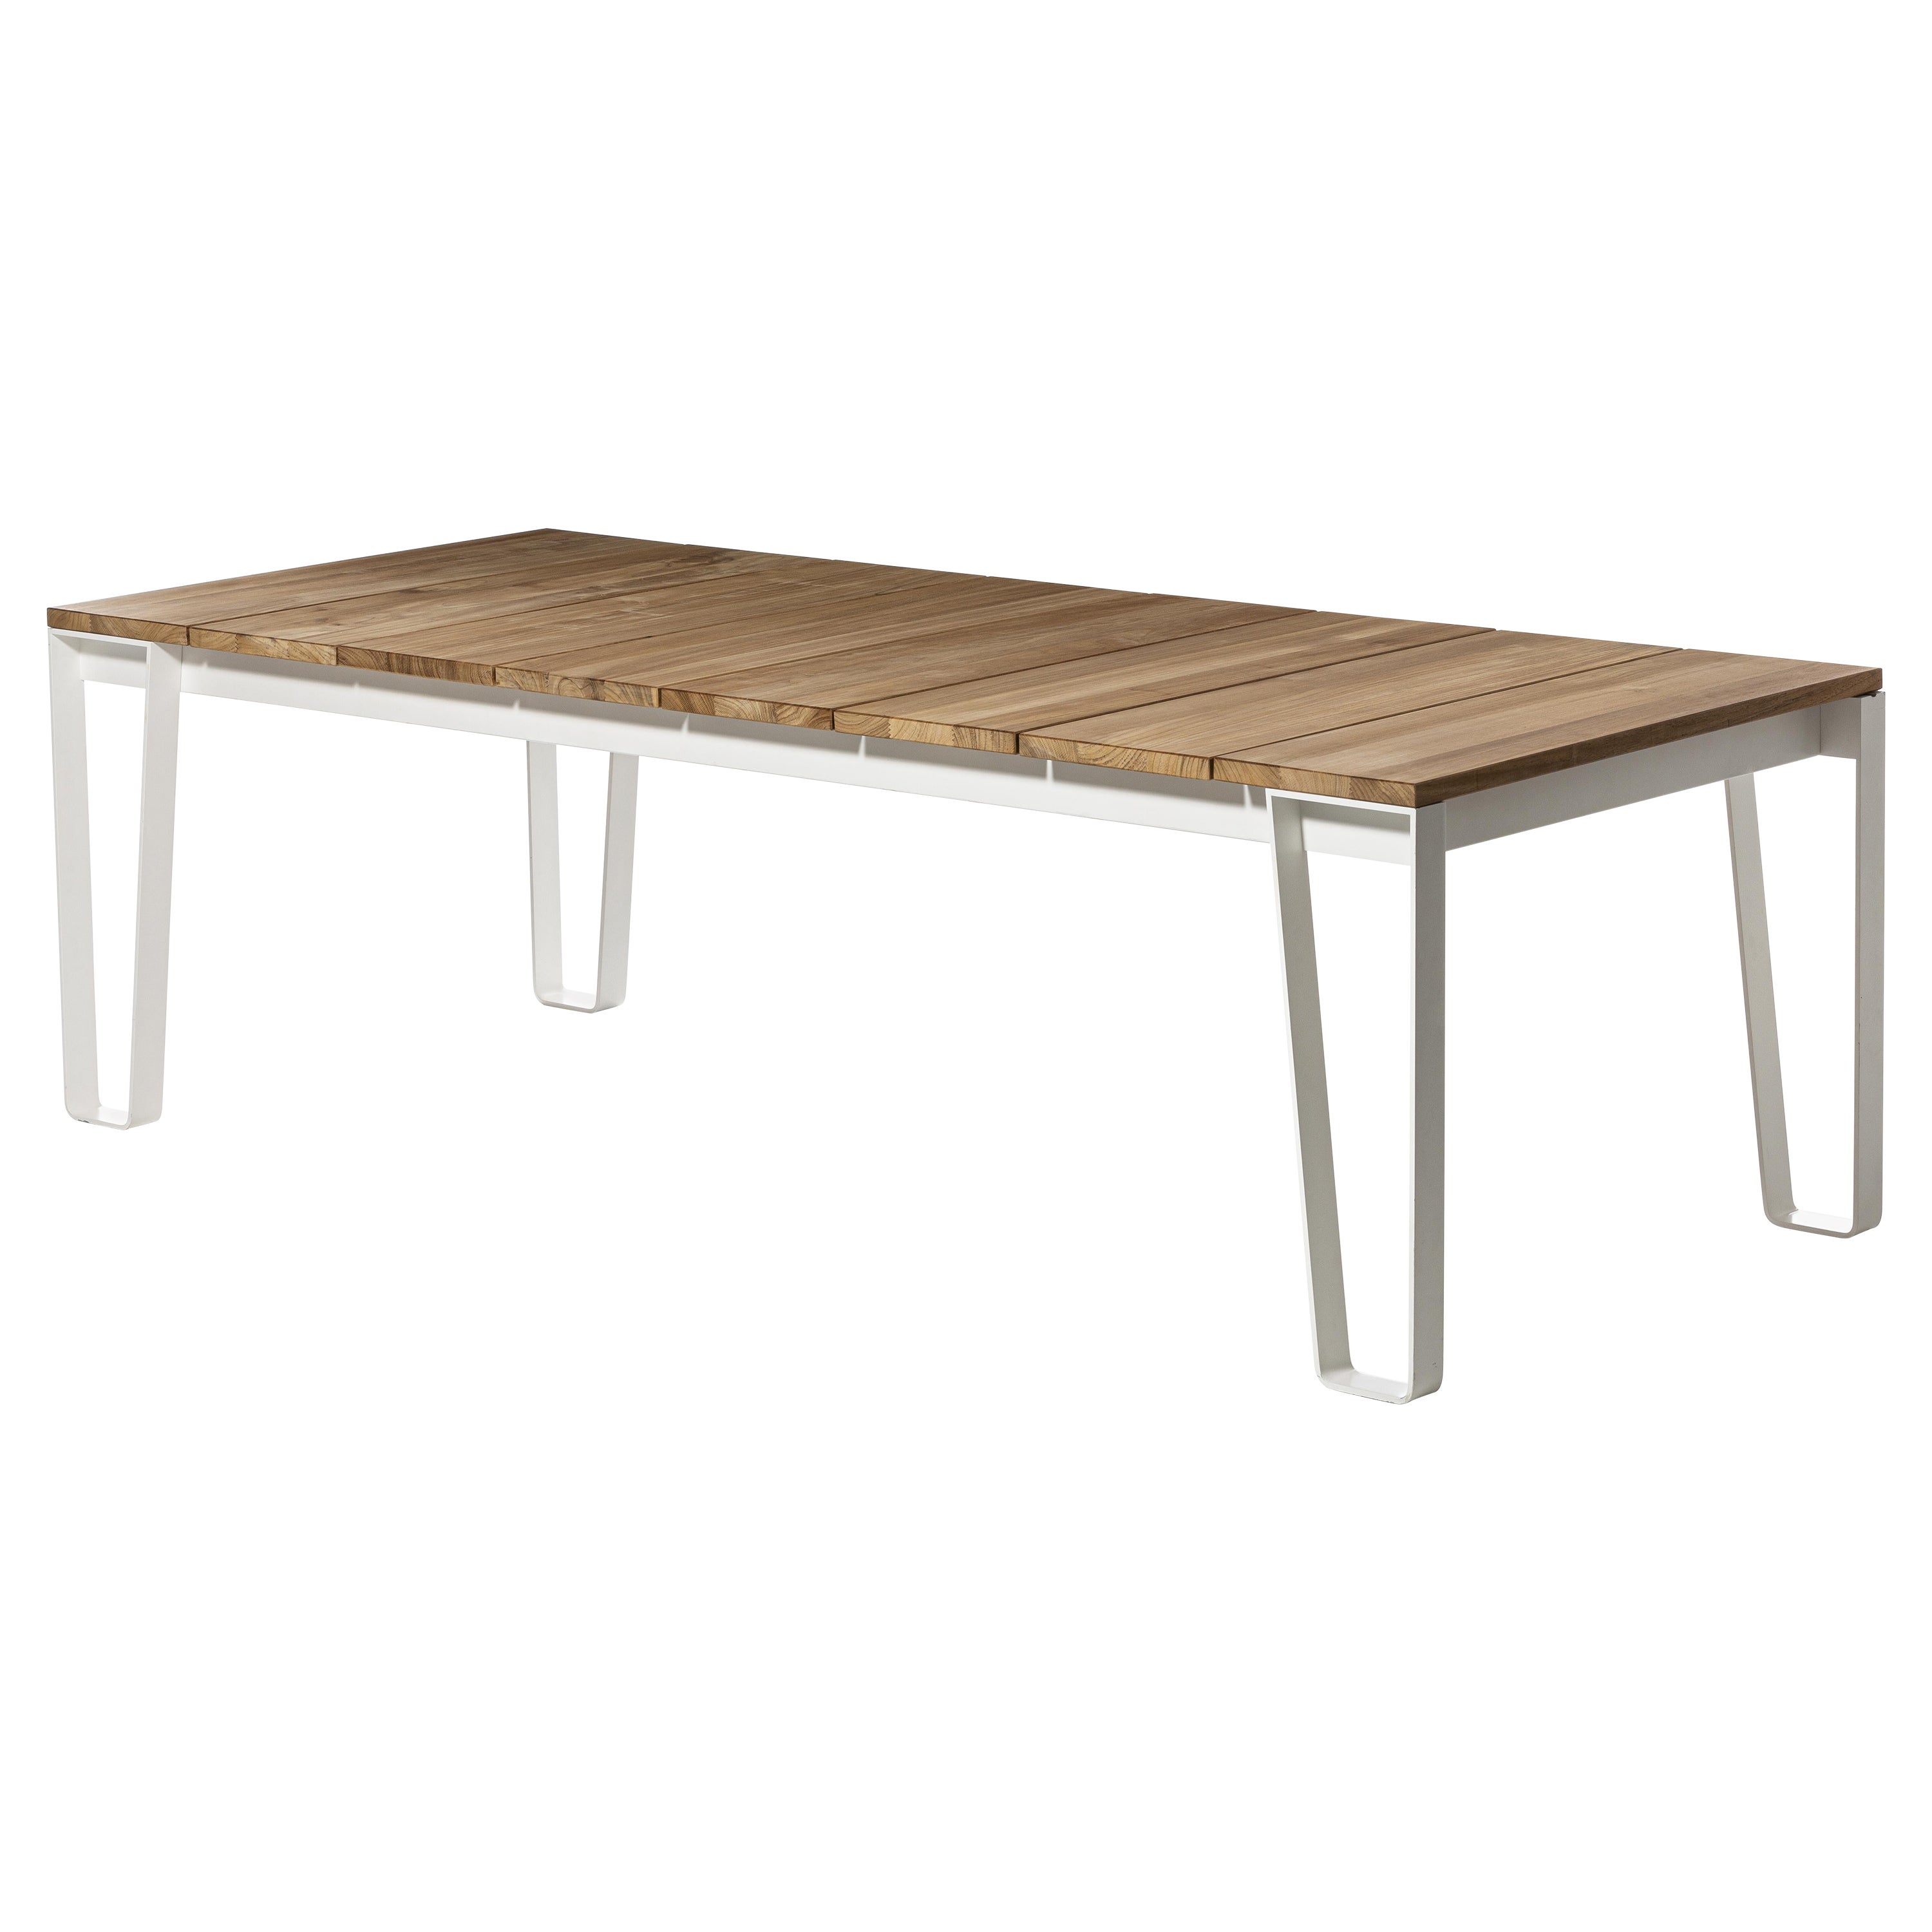 Gervasoni Large Inout 933 Table in Natural Teak Slats Top with Matt White Frame For Sale